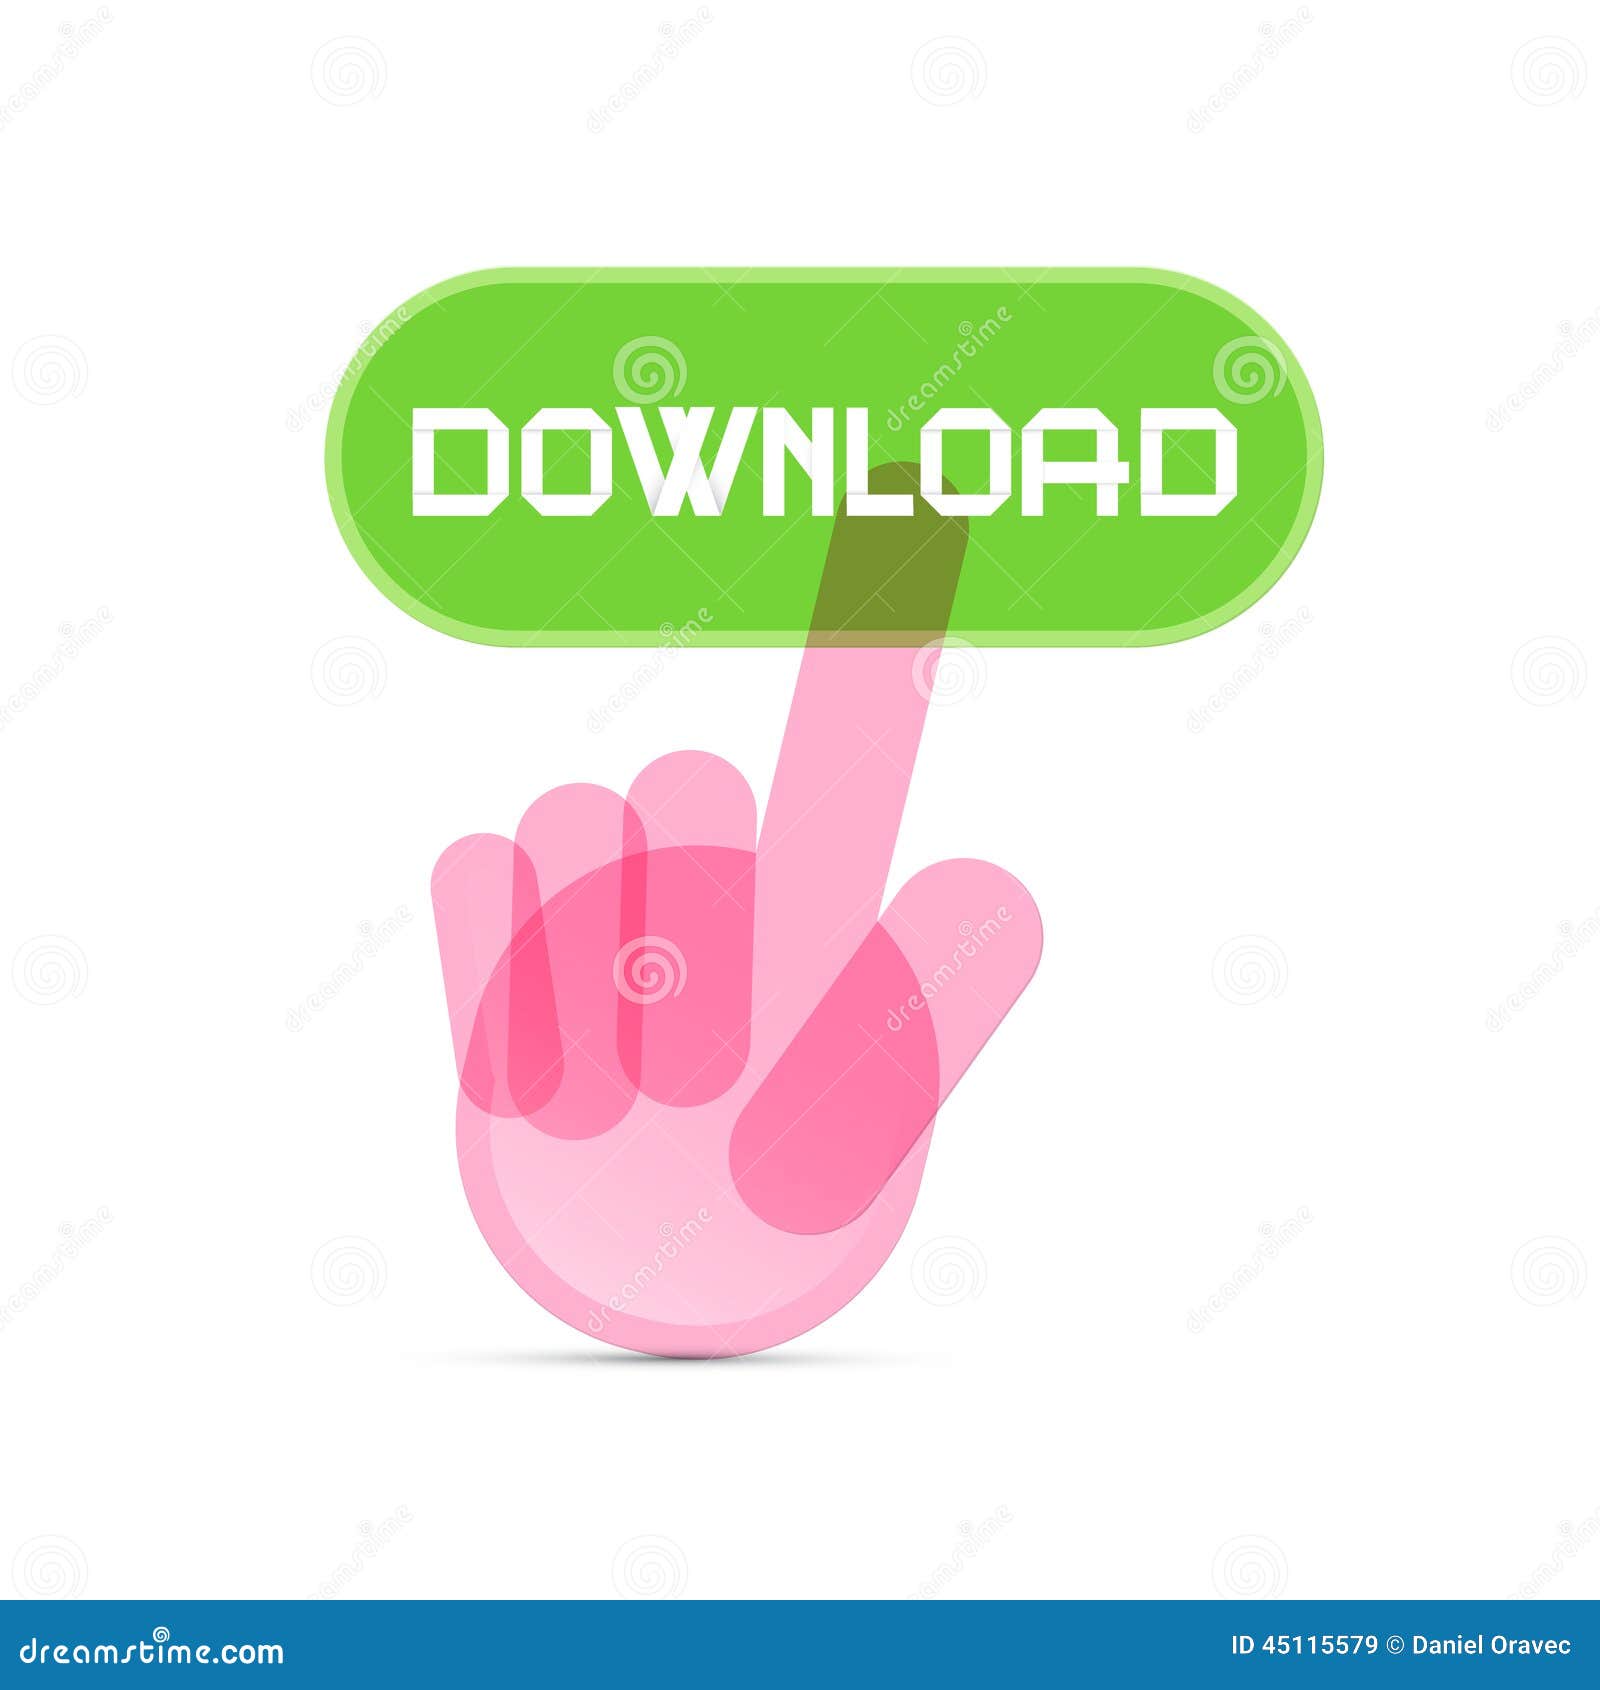 DOWNLOAD HOW TO